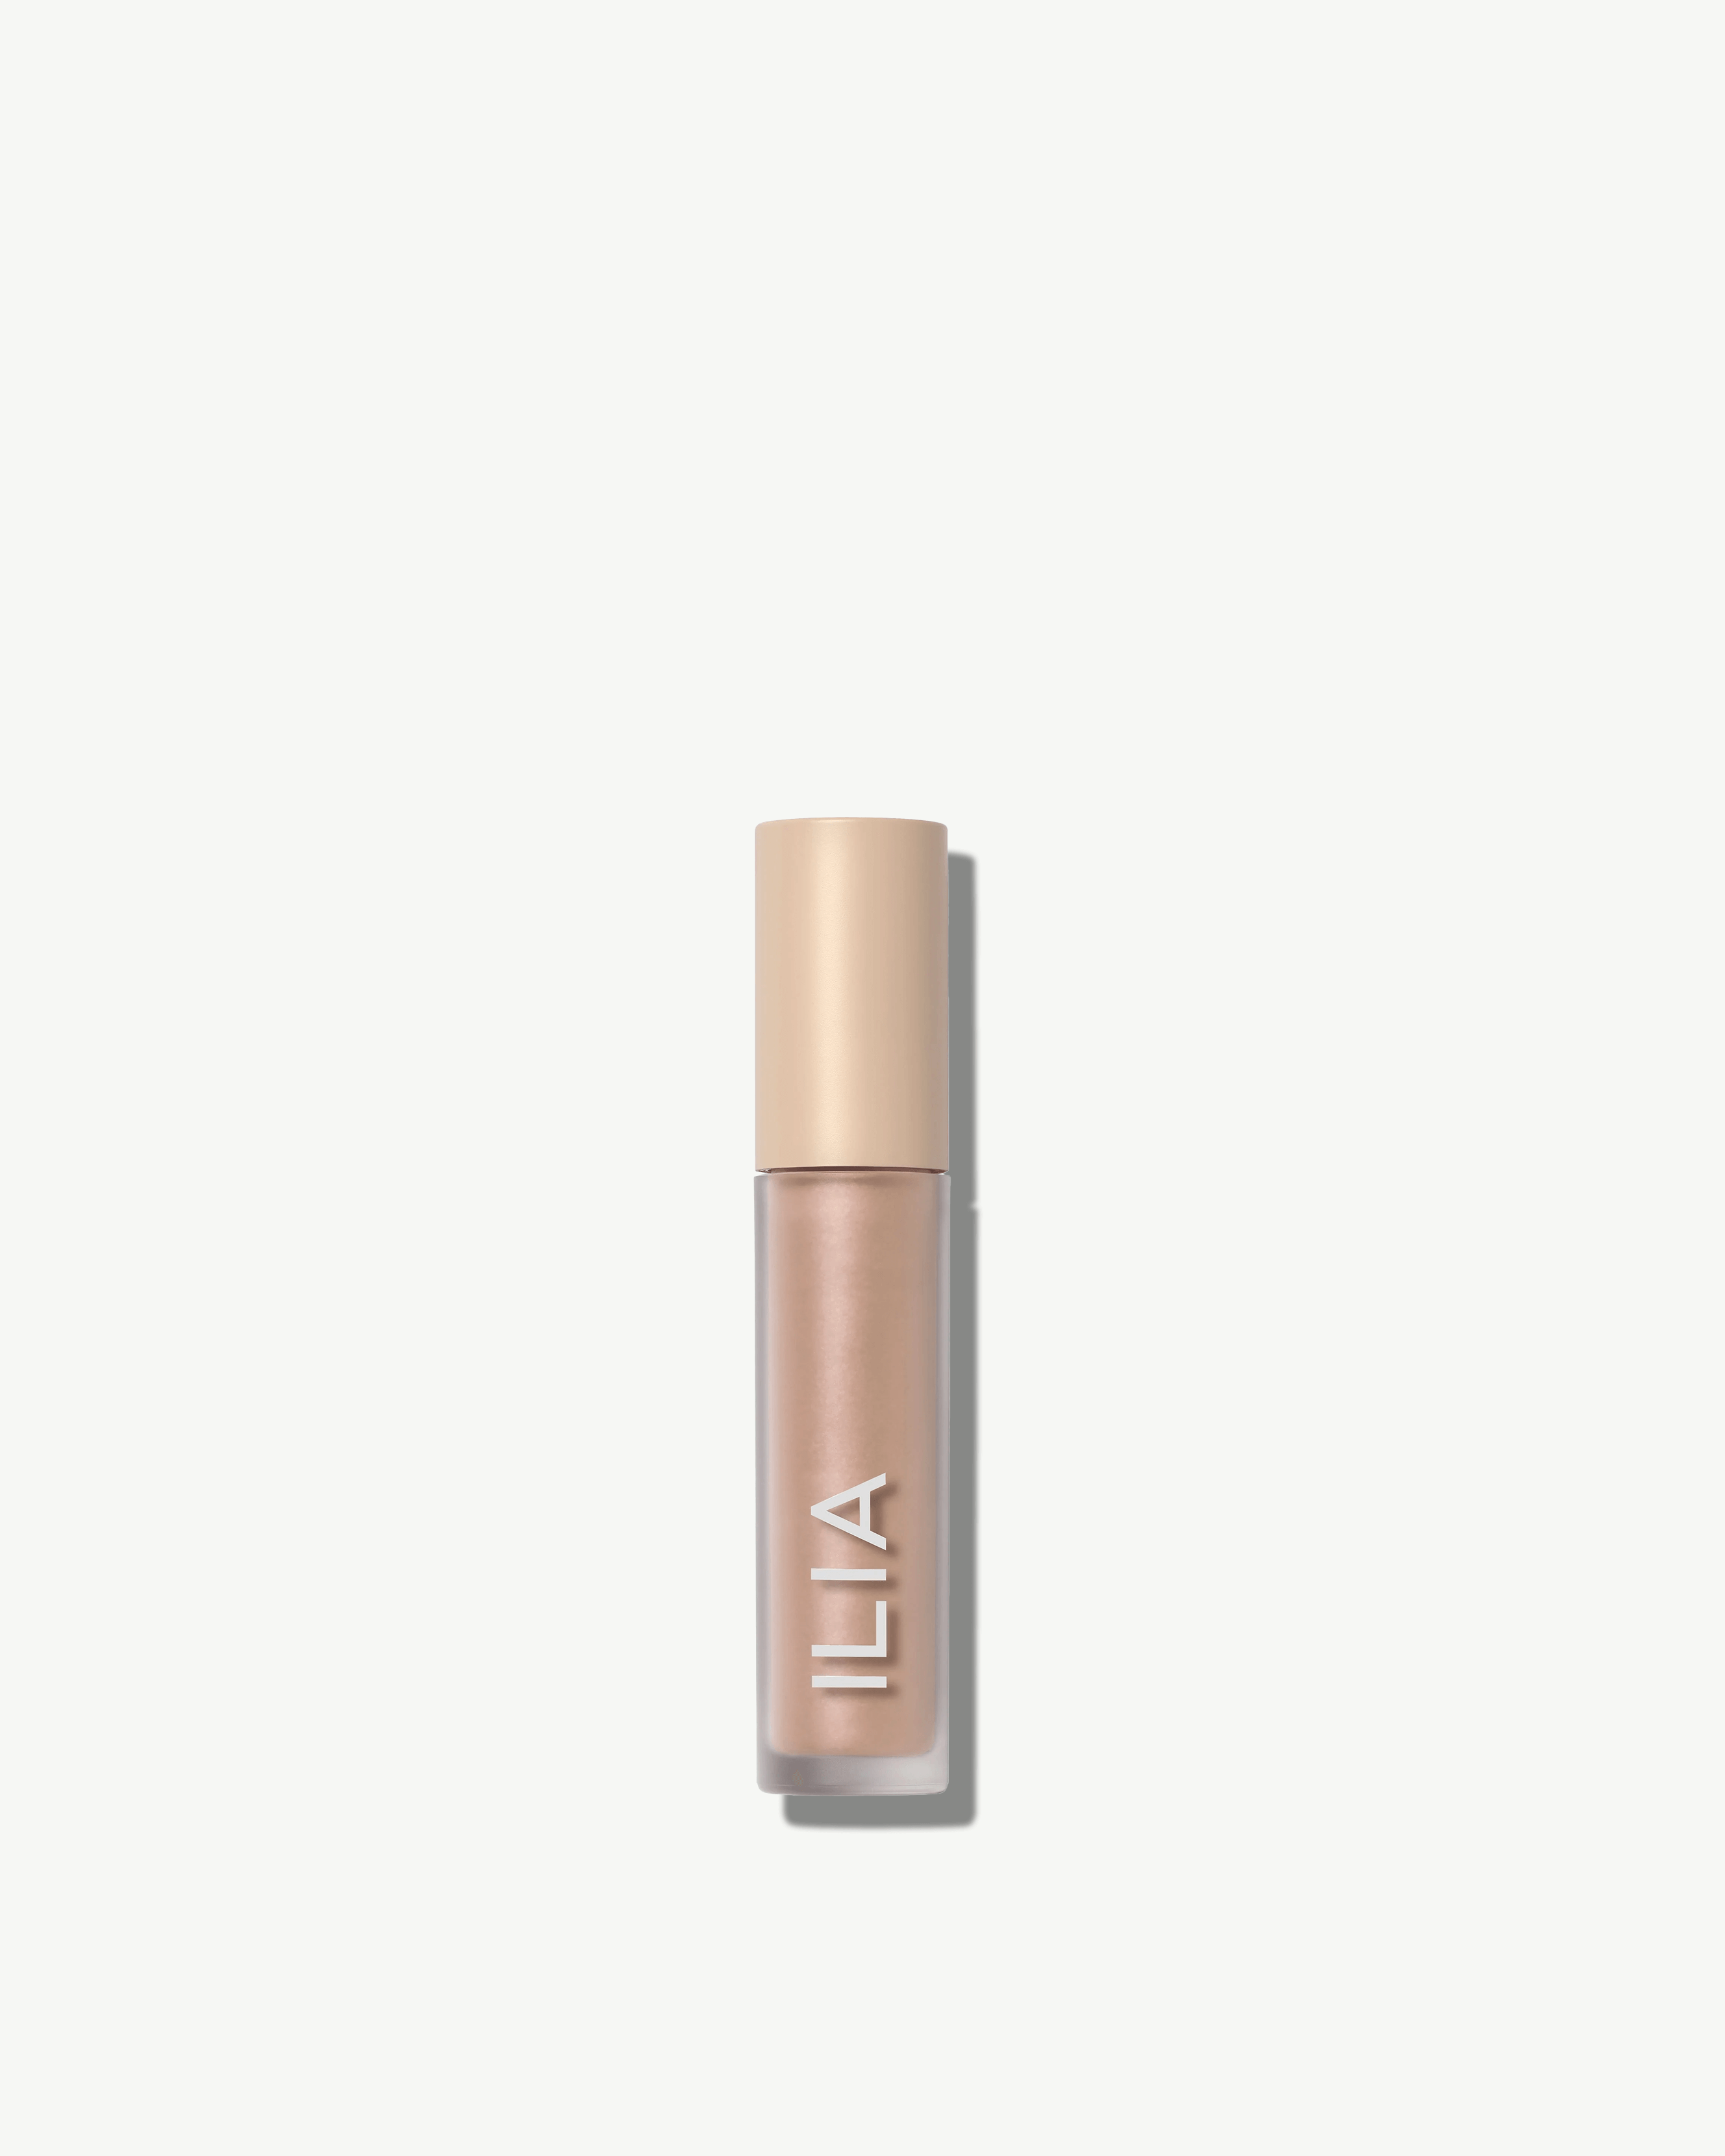 Glaze (light nude with warm champagne pearl)